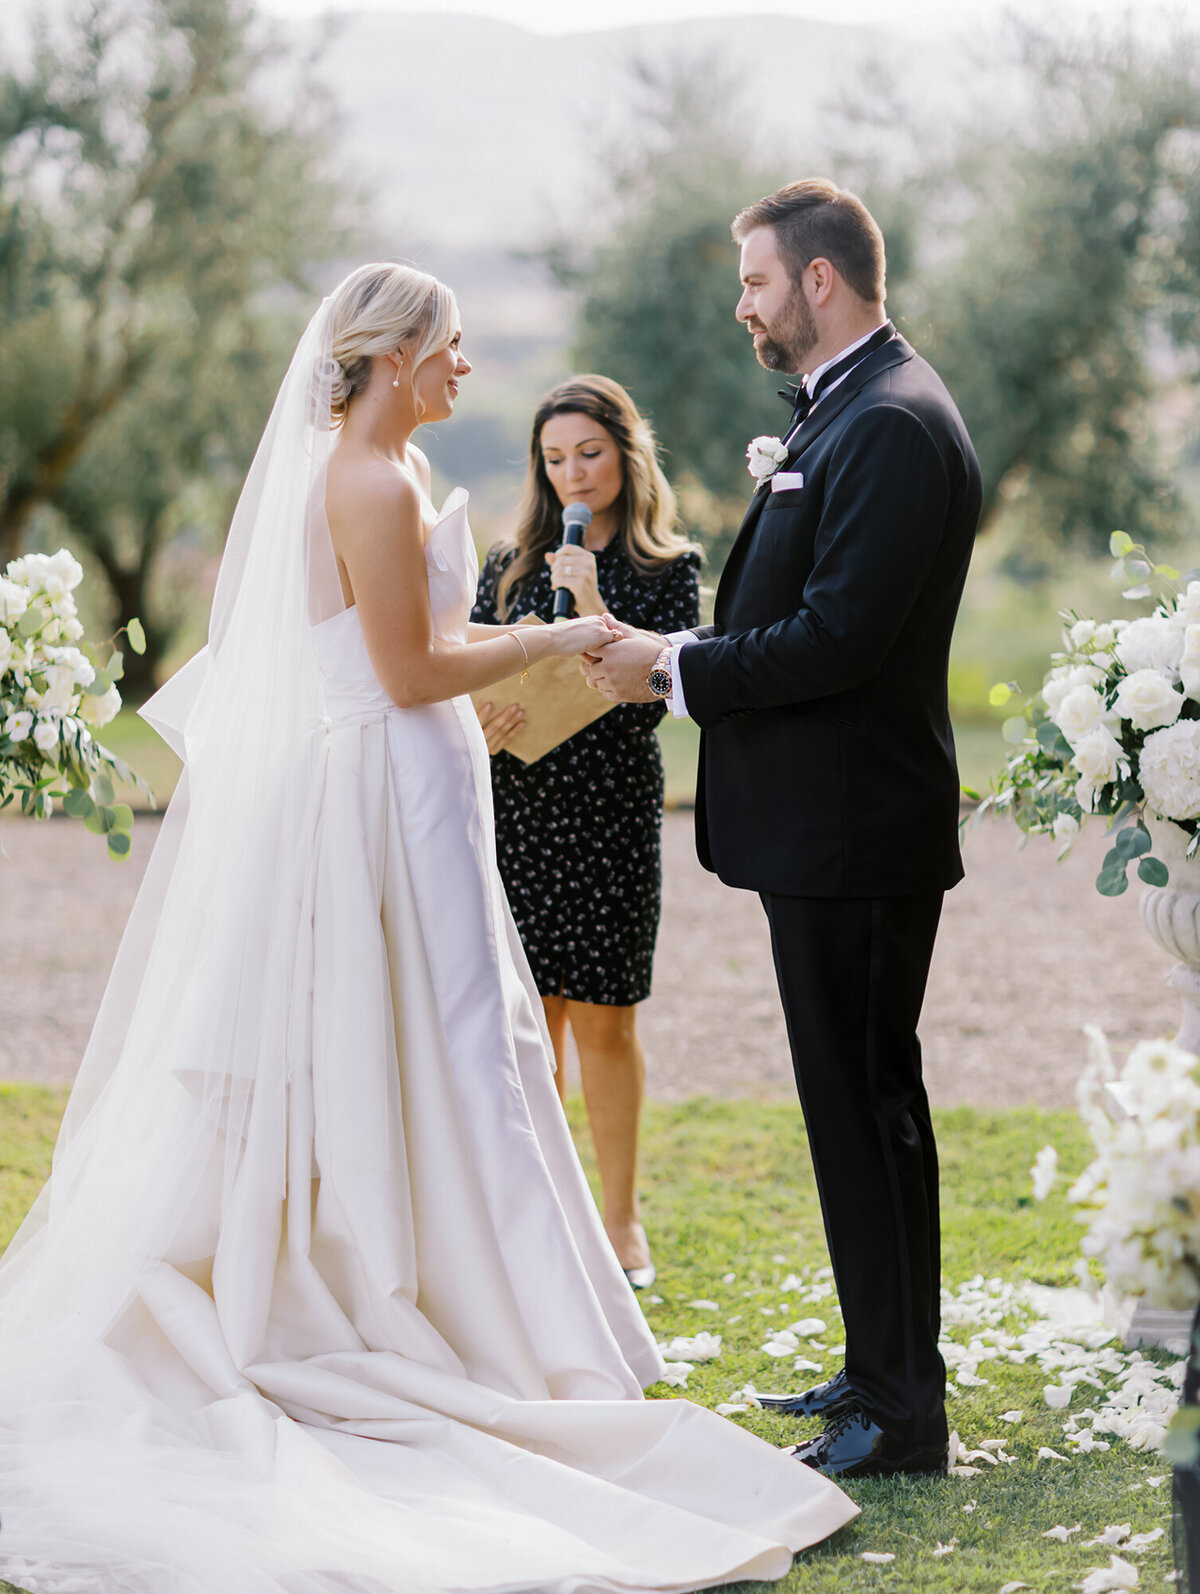 Arielle Peters Photography Tuscany Italy Wedding - 63